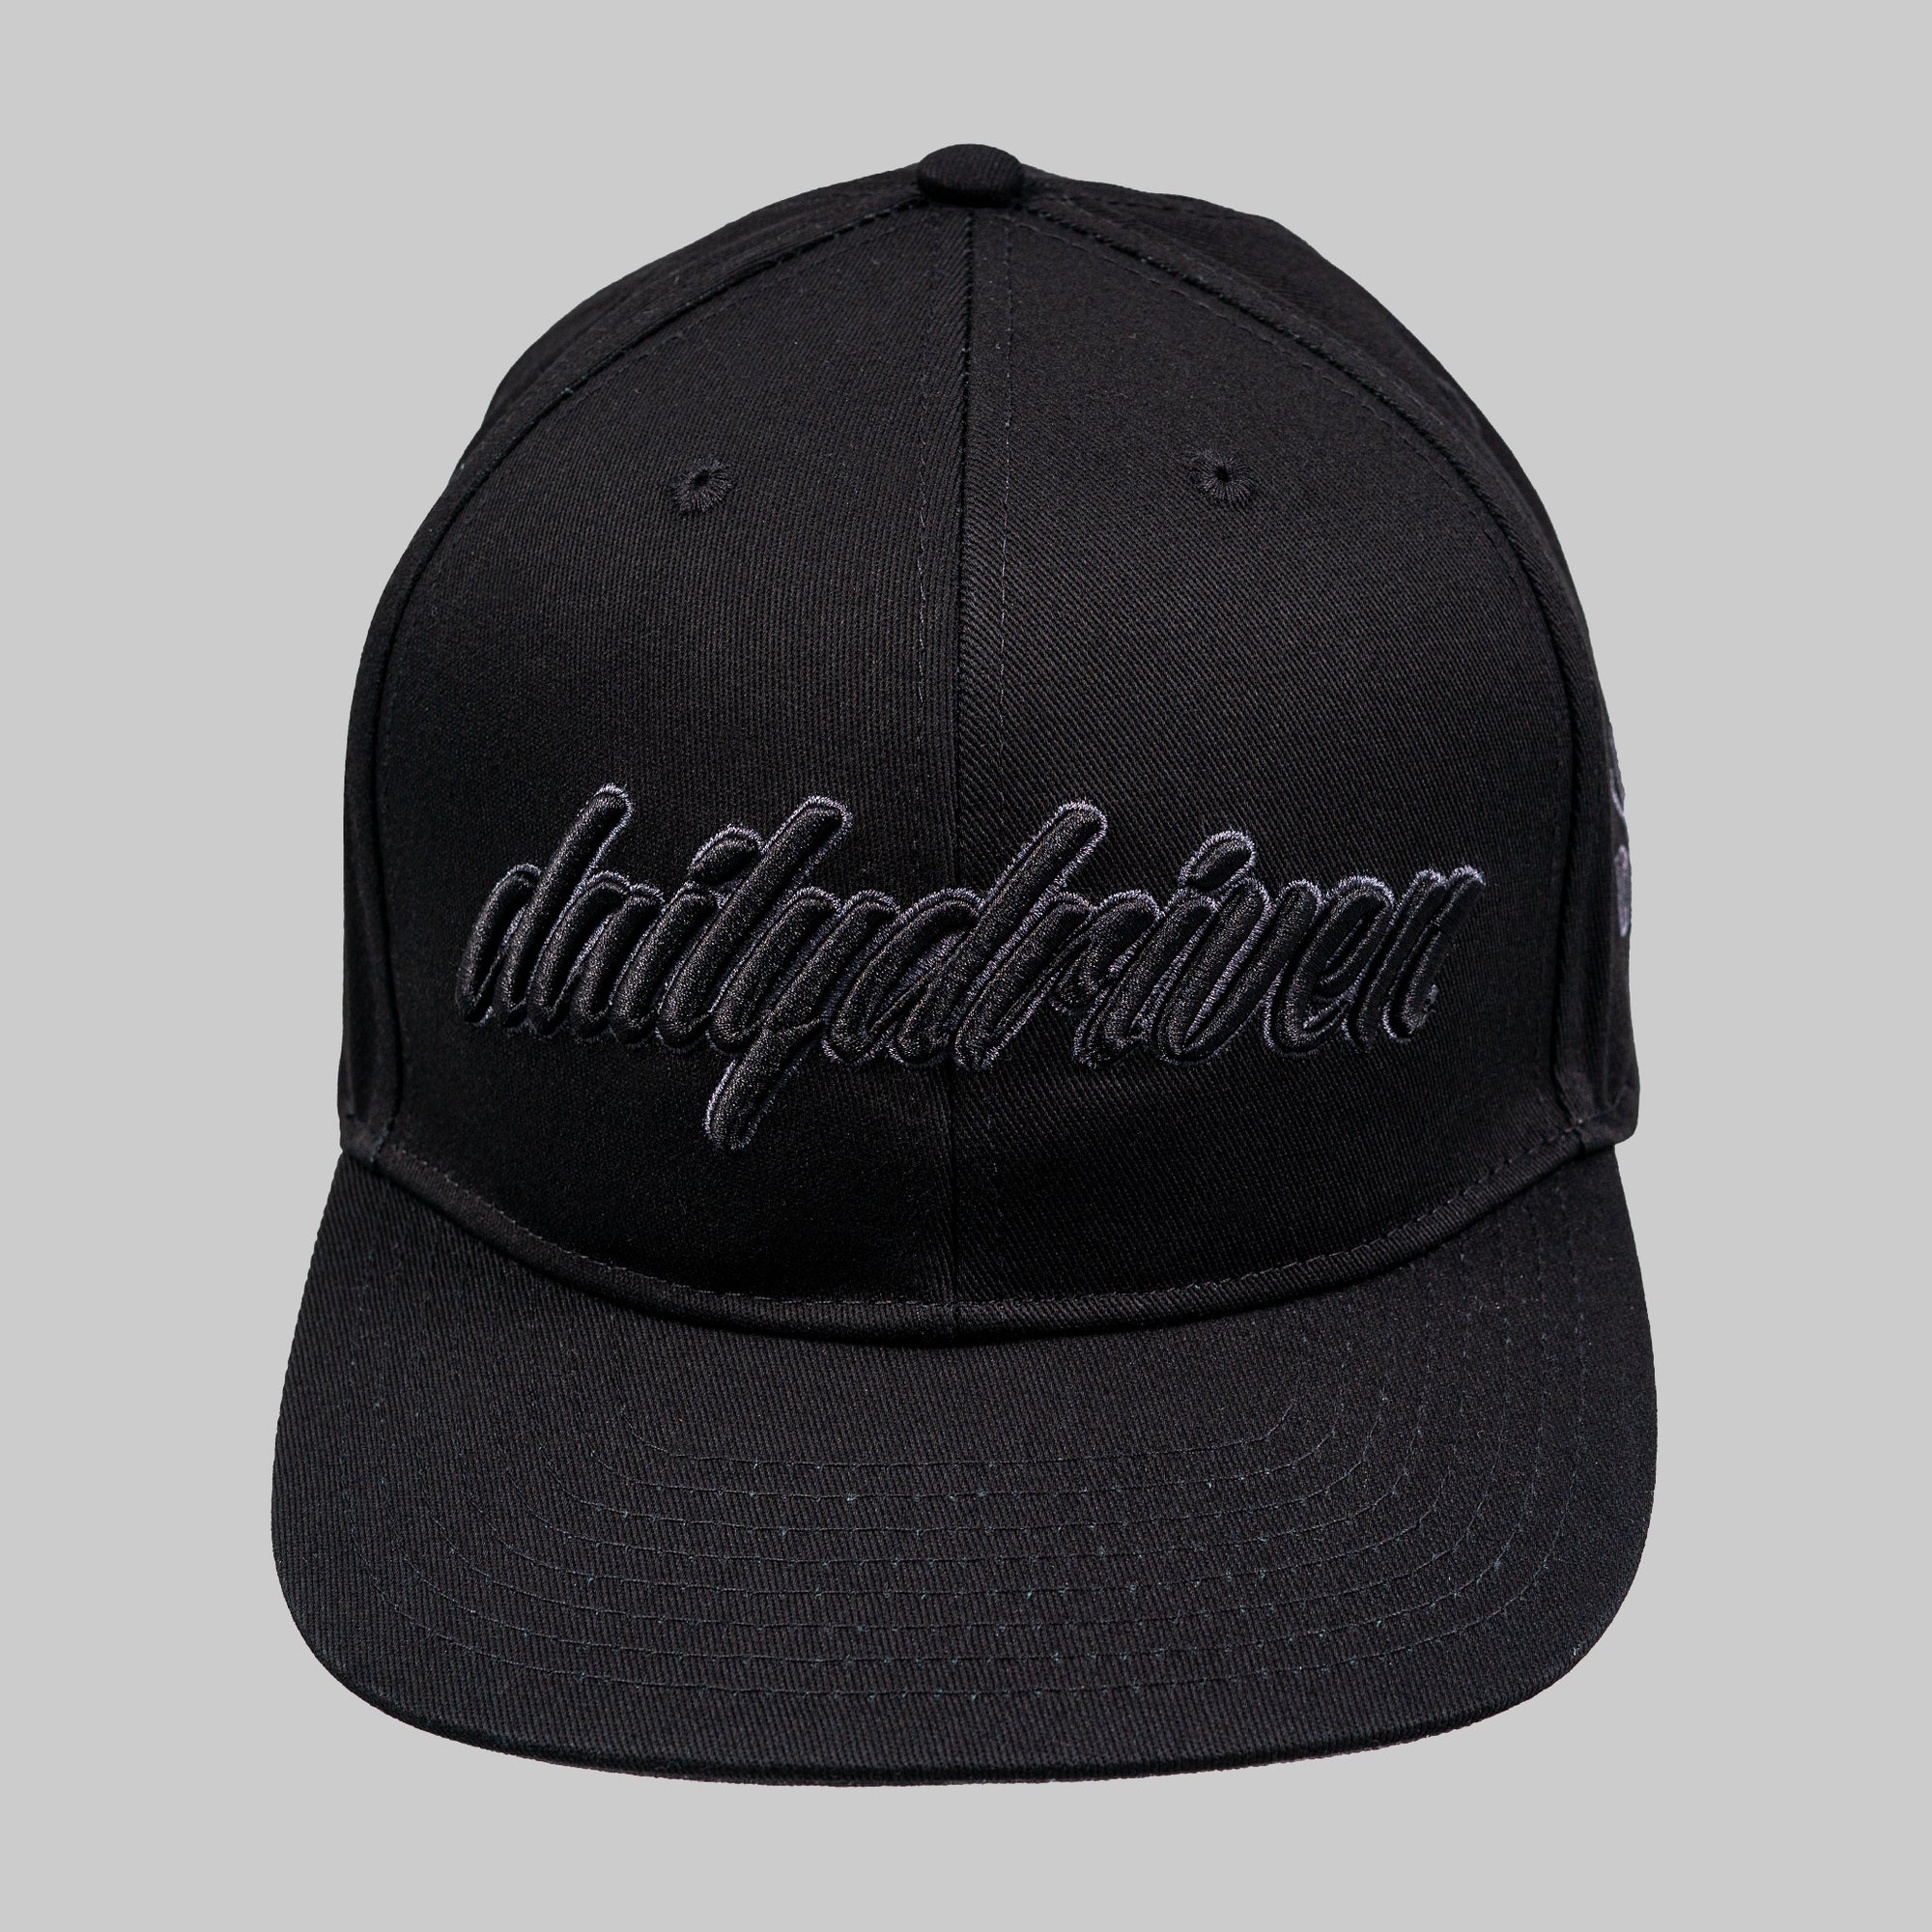 DailyDriven Relaunch Blacked Out Snapback Hat